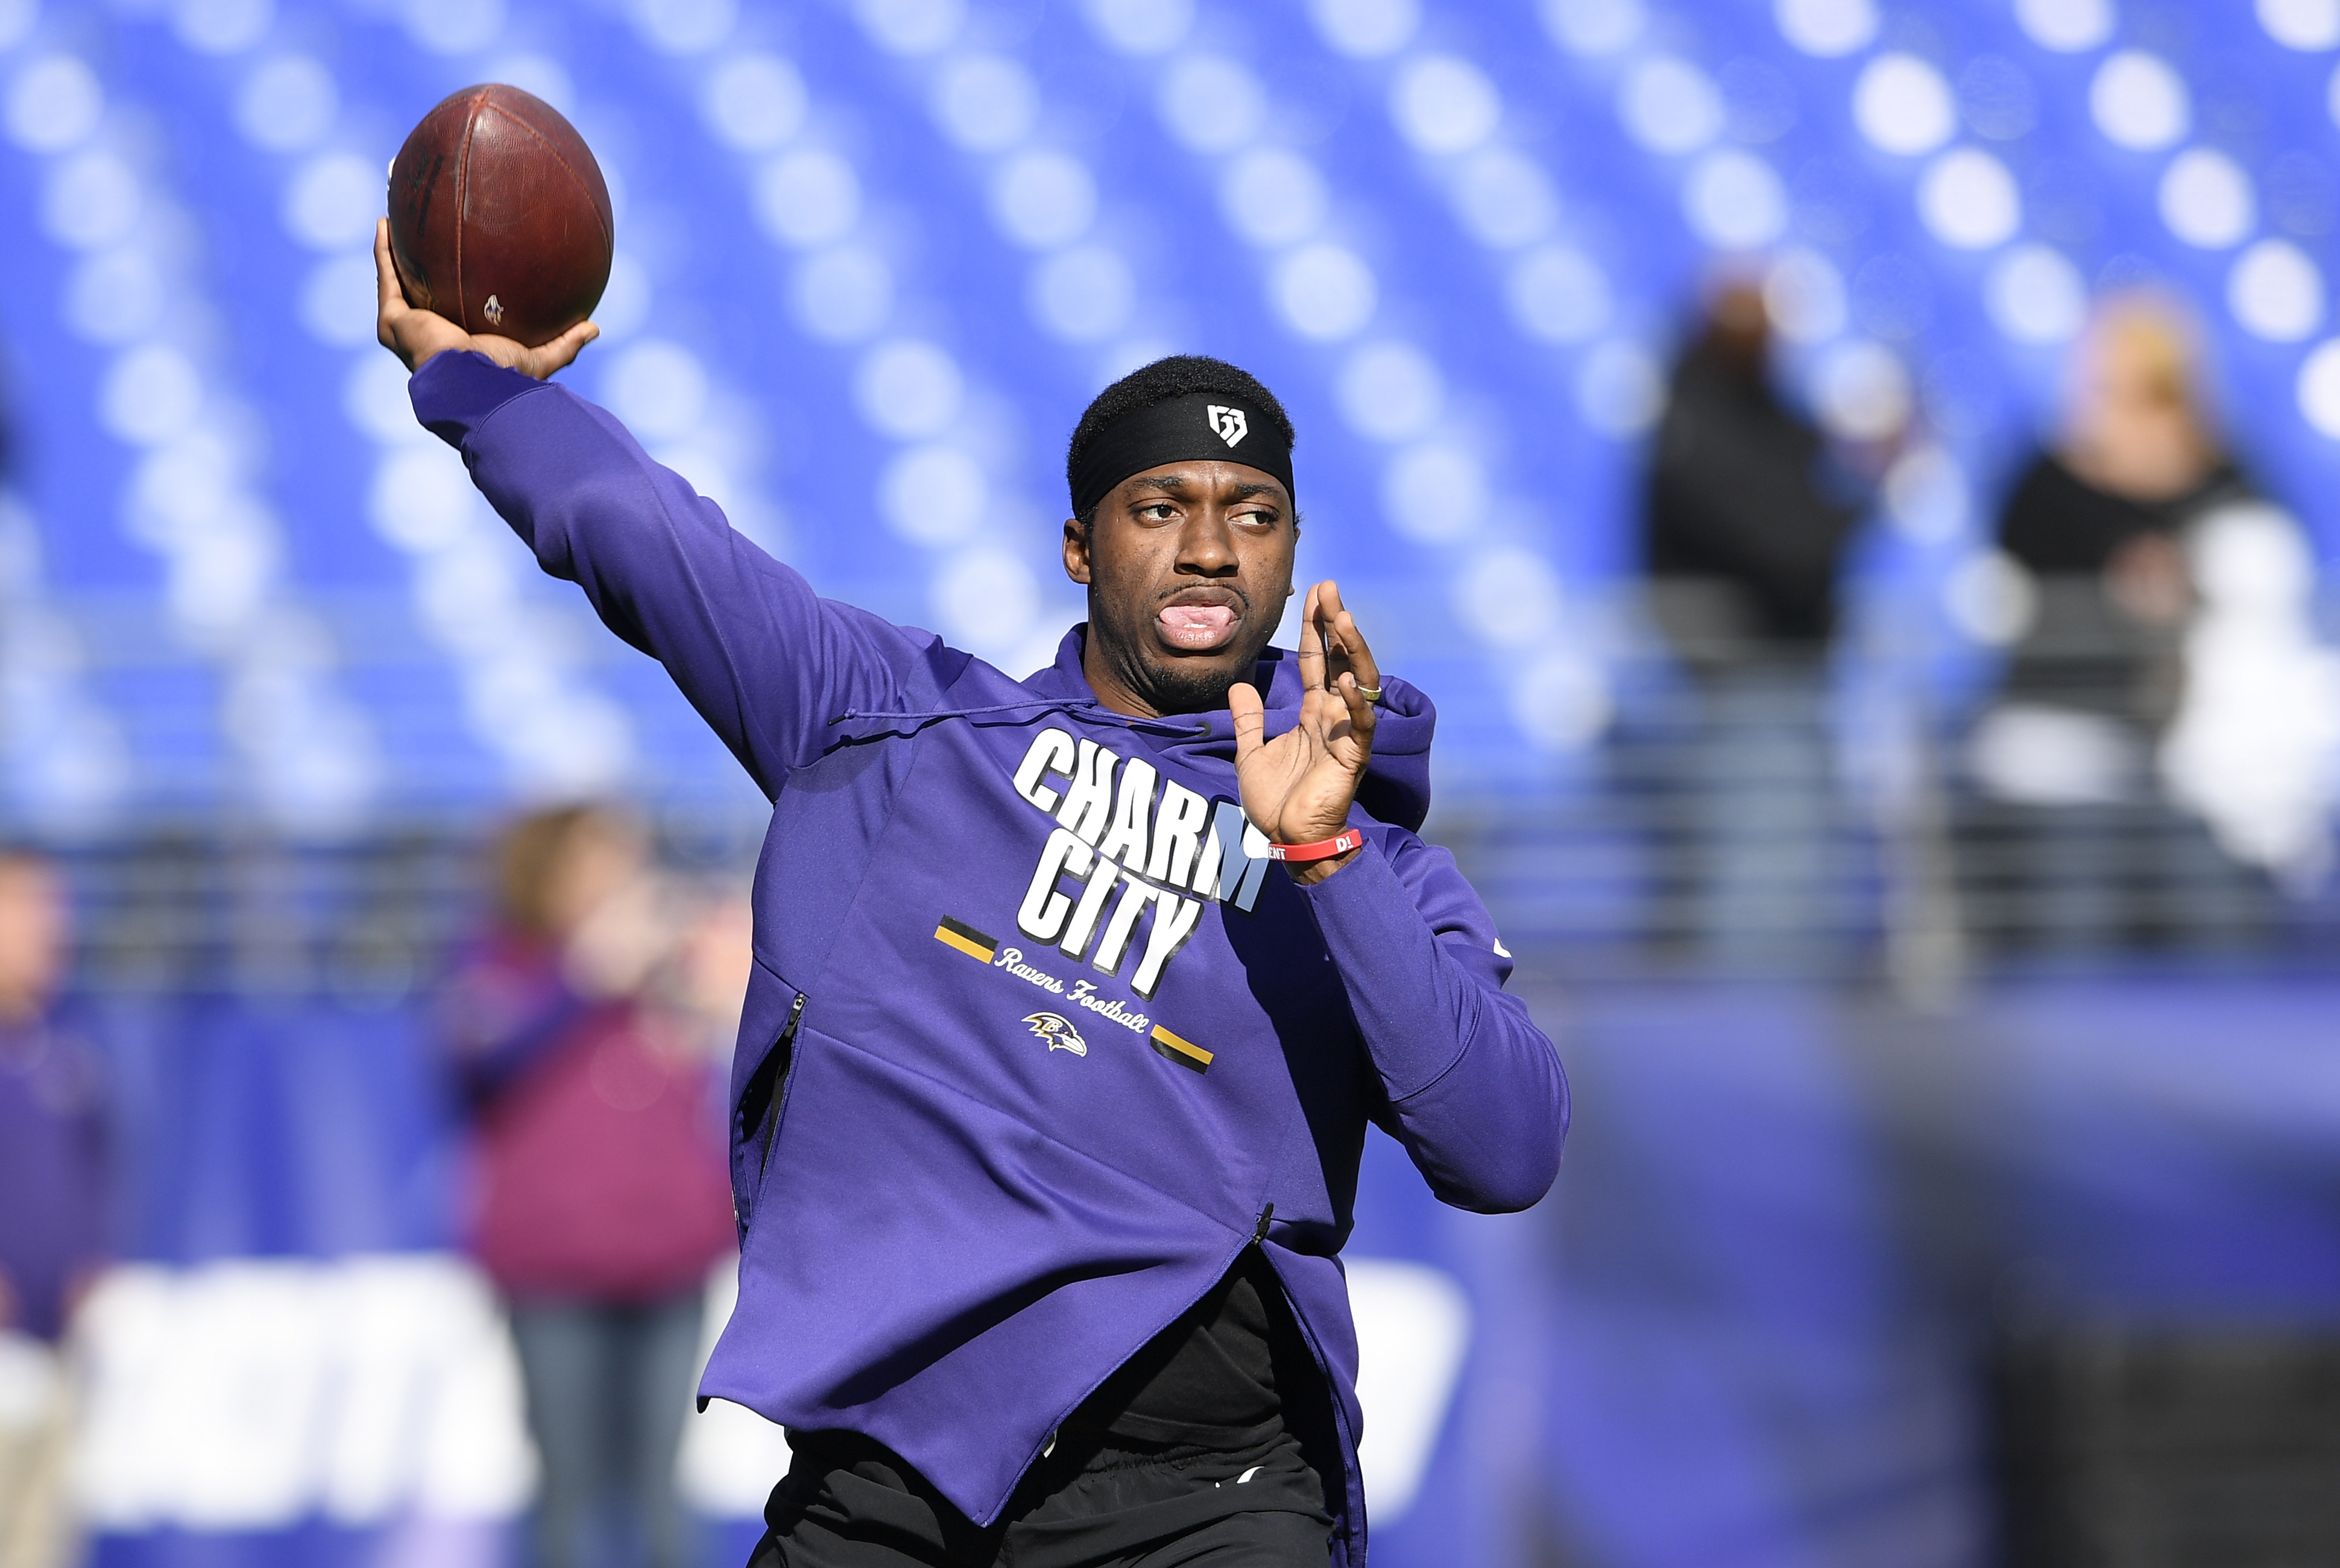 Whenever Baltimore Ravens play, Robert Griffin III could step into the  spotlight 